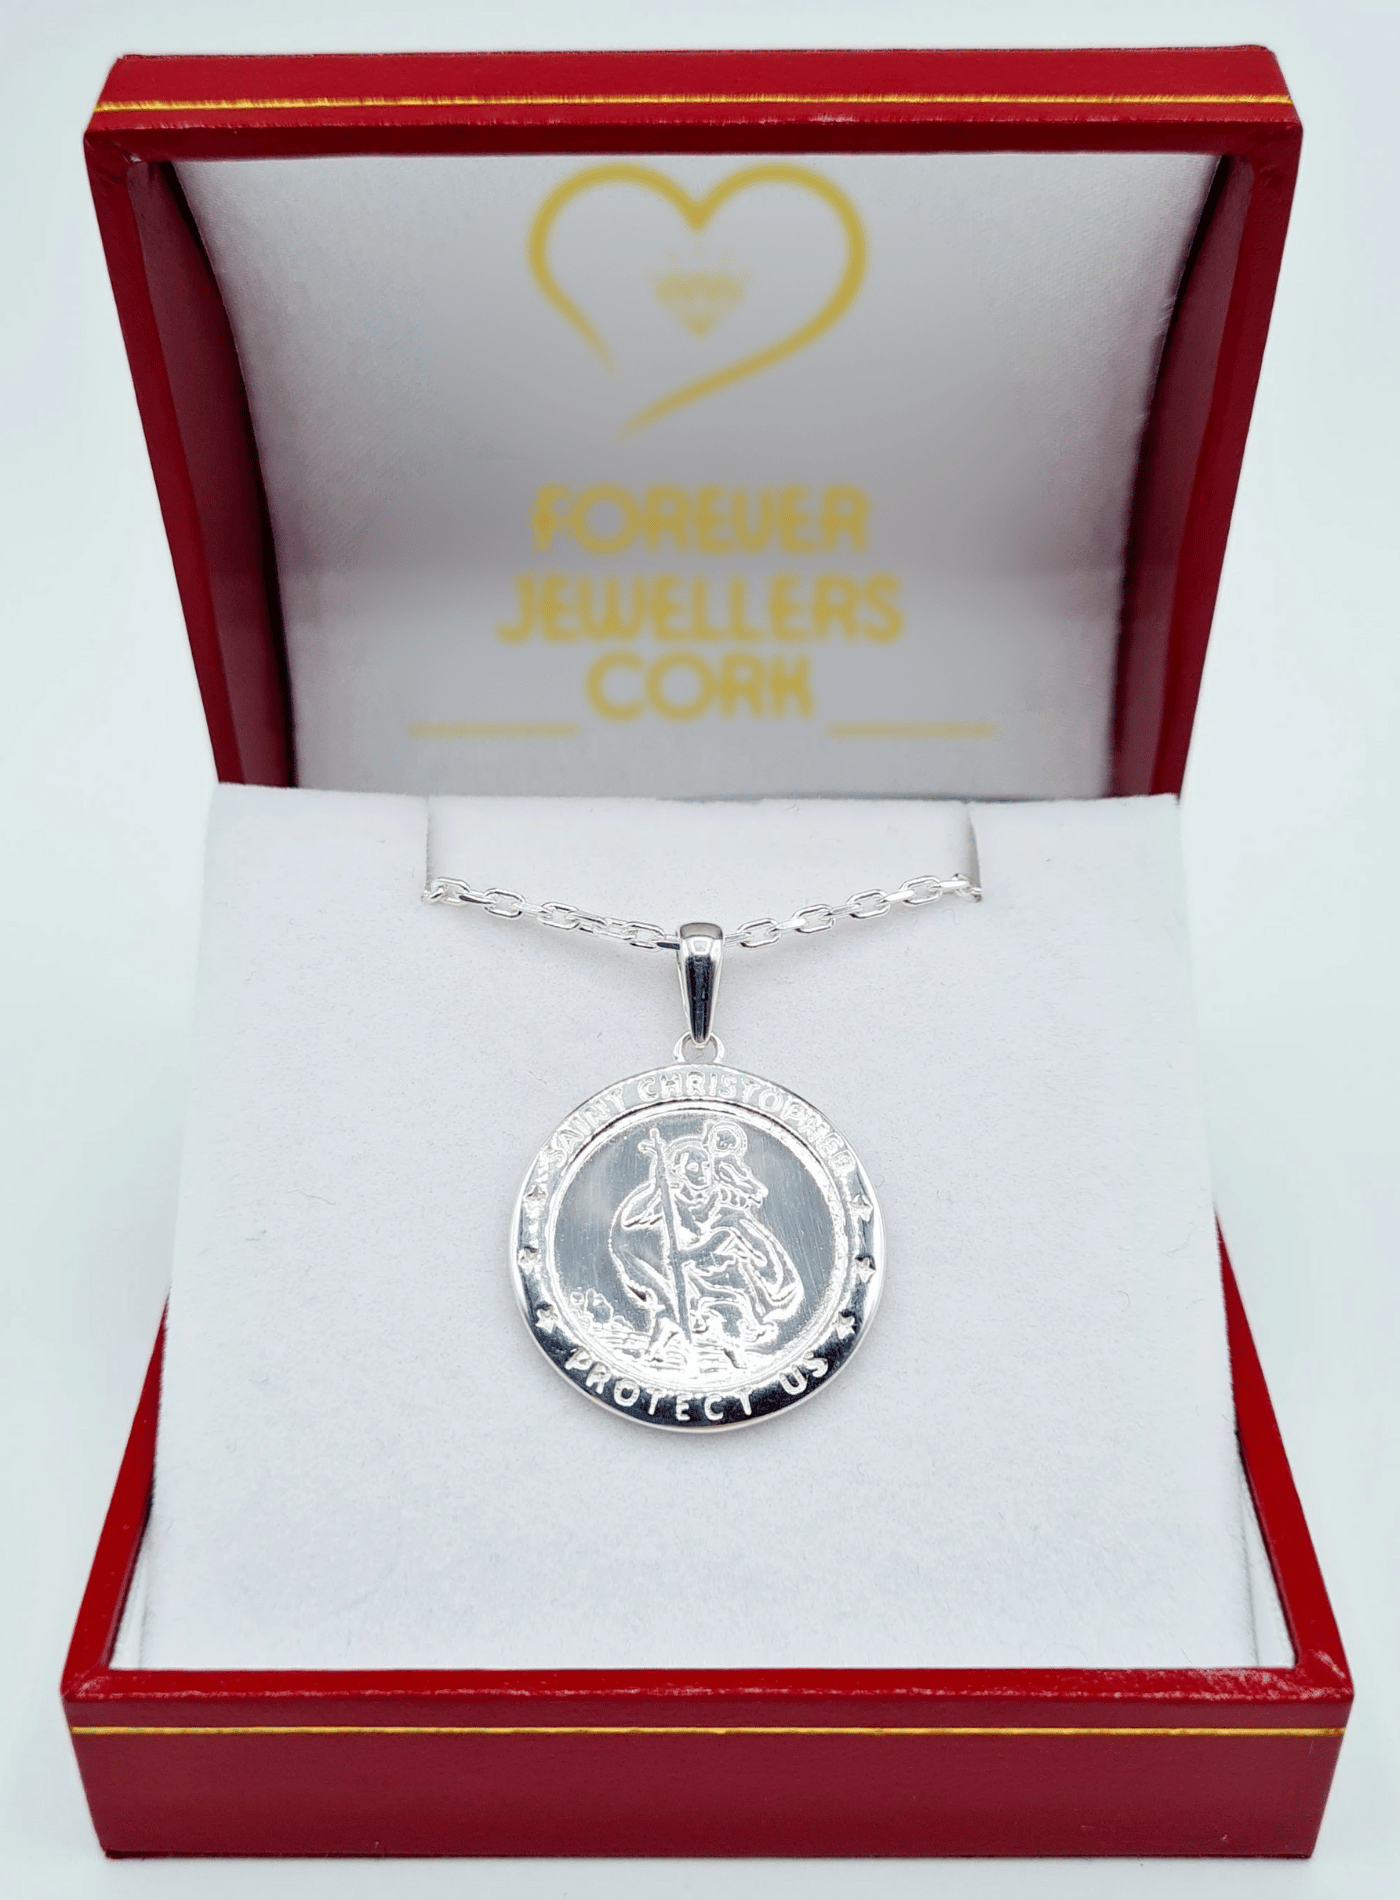 Alexander Castle Small 925 Sterling Silver St Christopher Pendant Necklace  - Oval 12mm x 9mm with 16